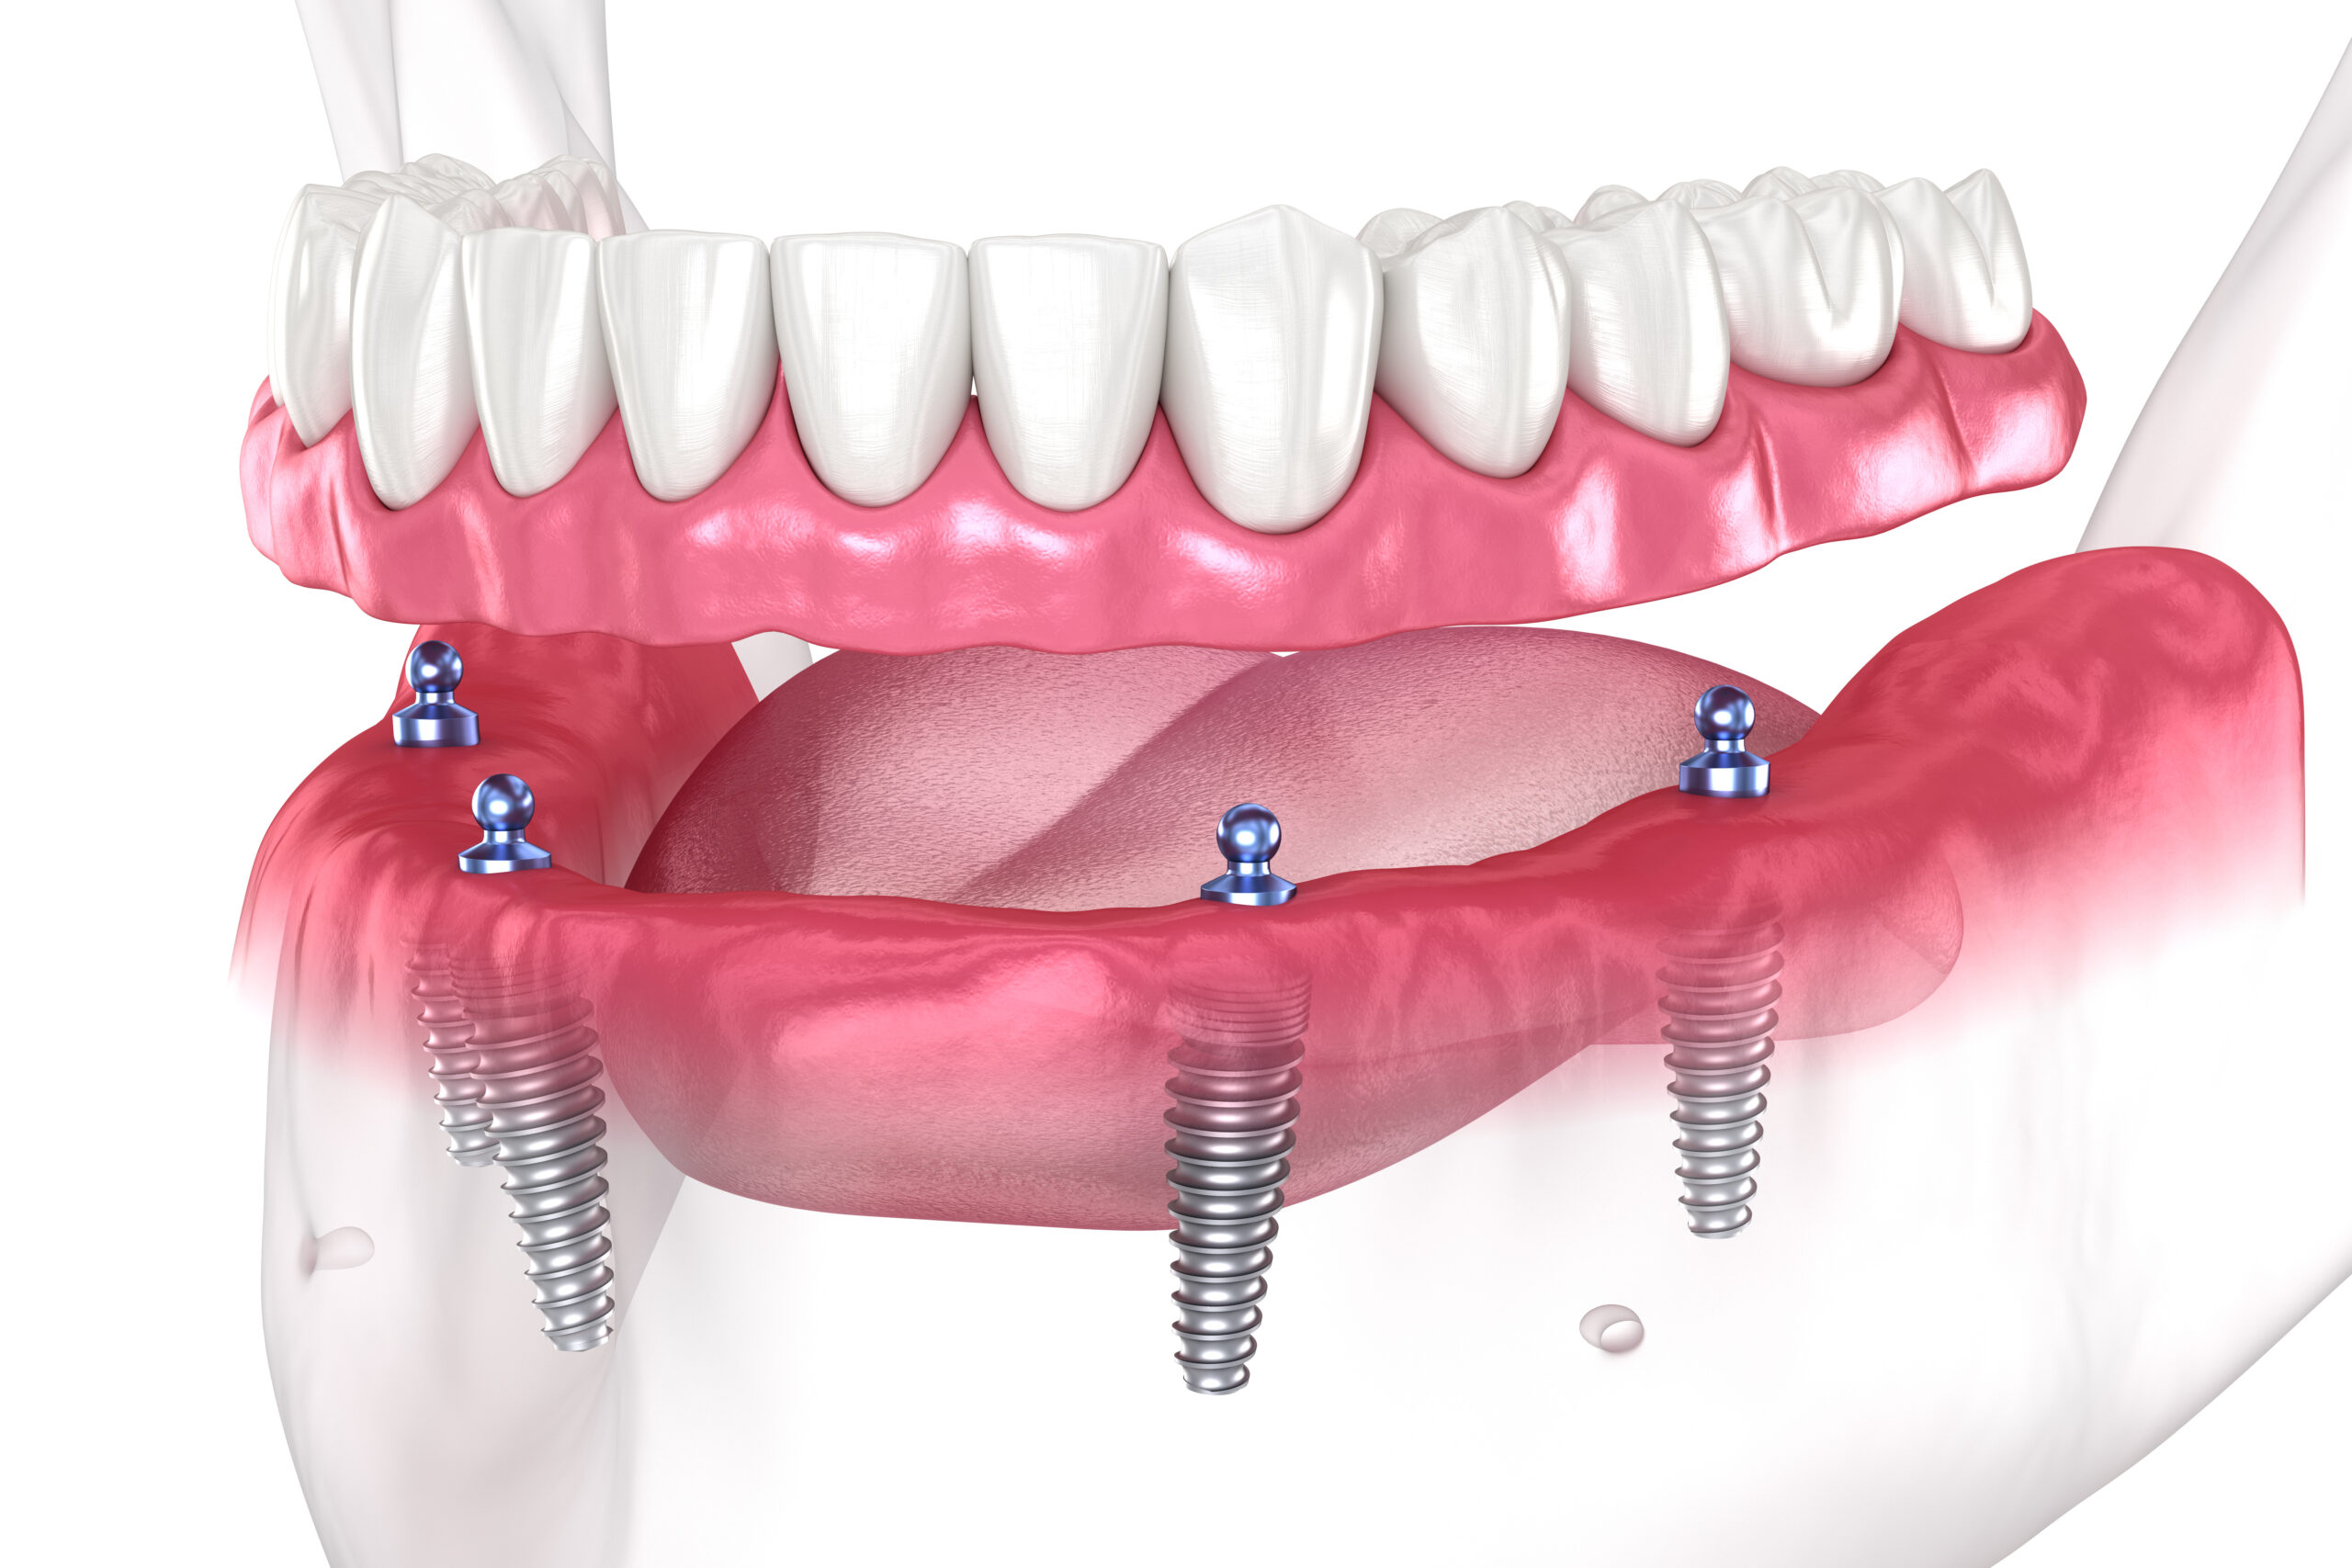 a full mouth dental implant graphic showing the implant posts in the jaw.